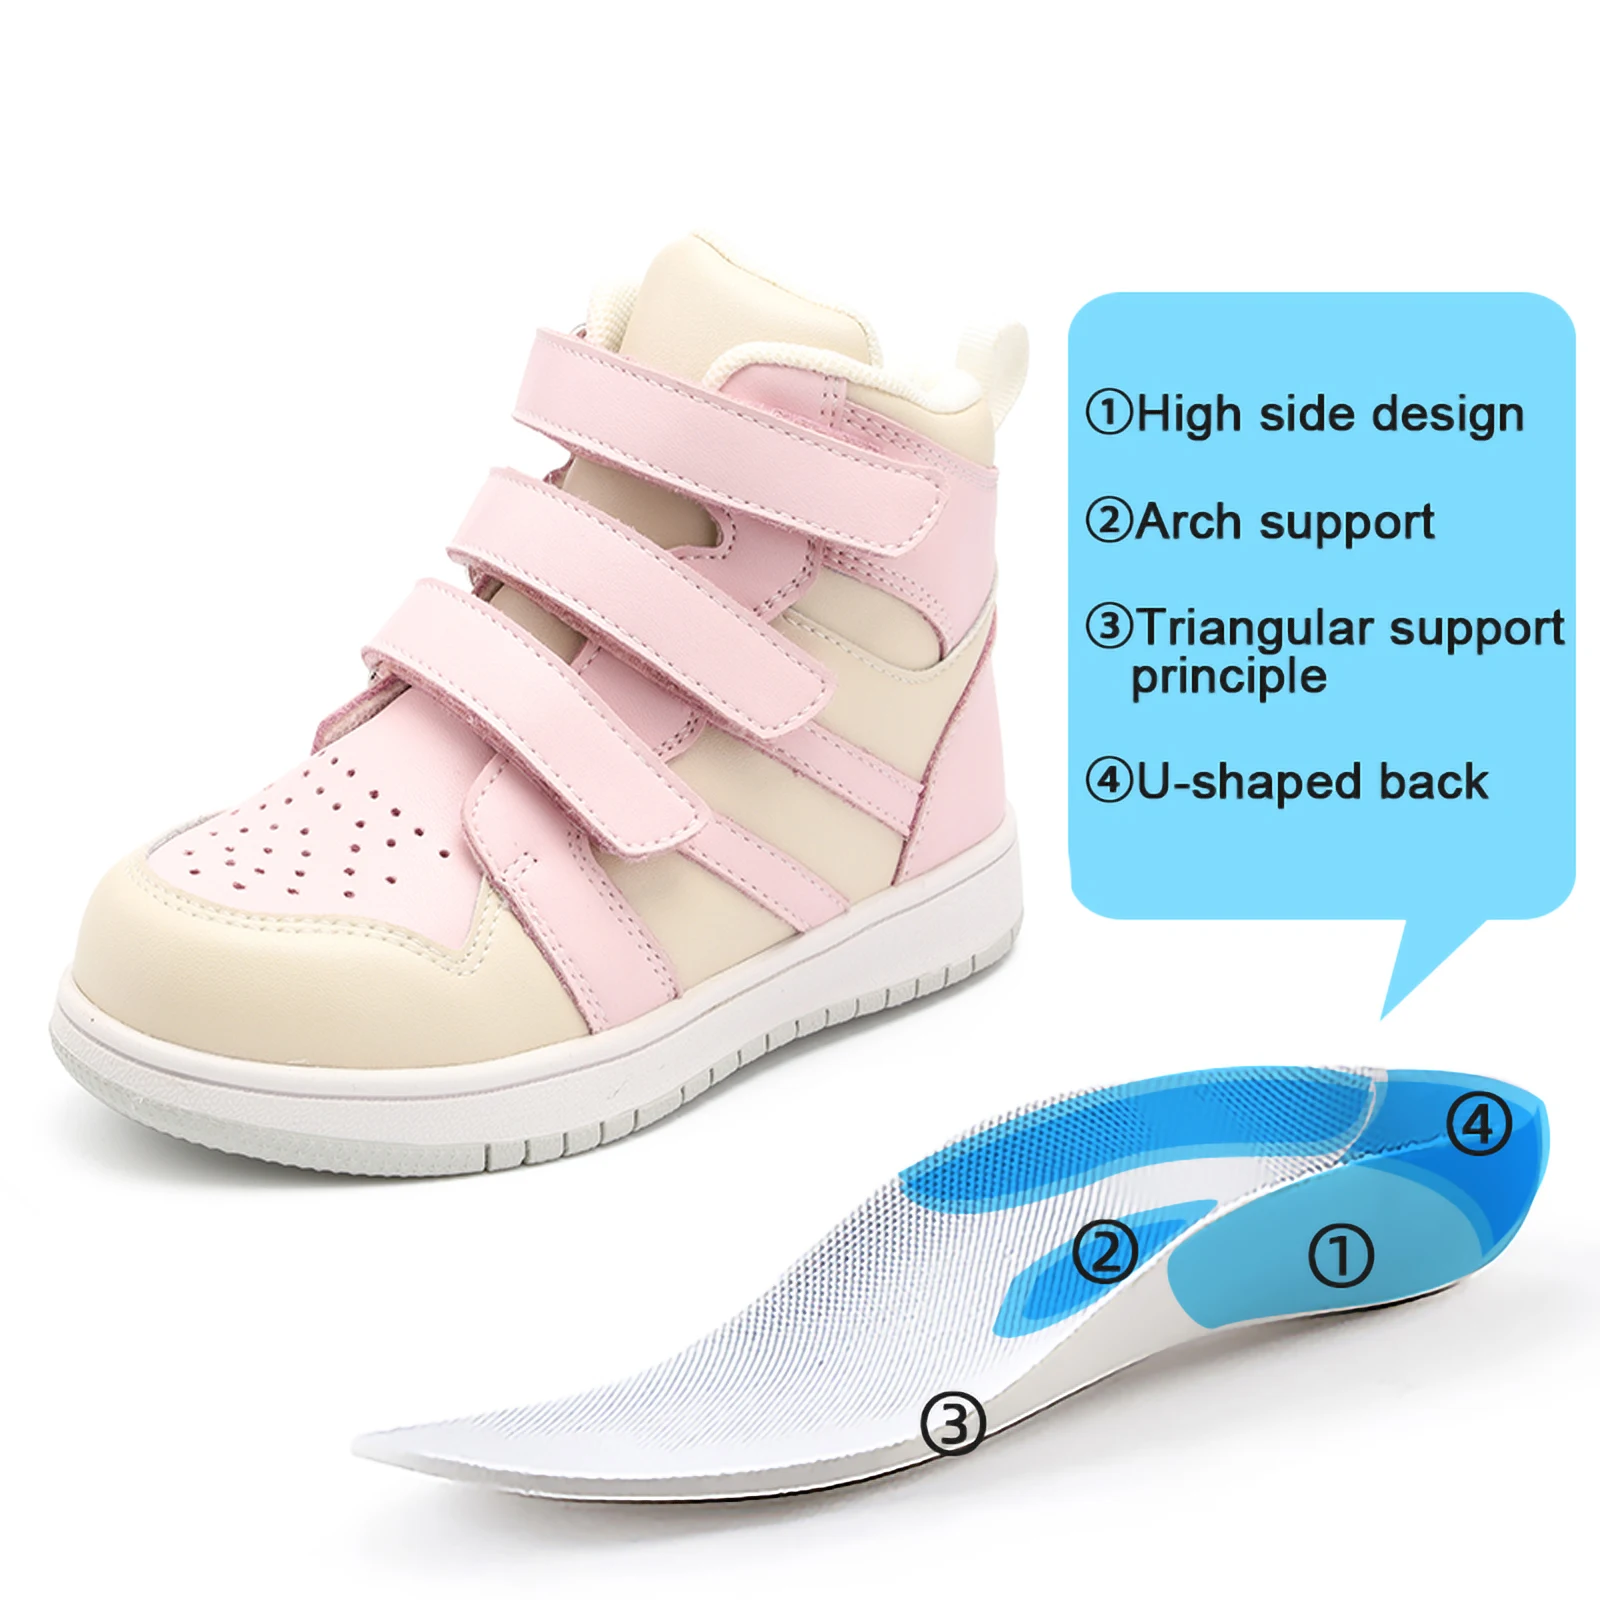 Orthopedic Shoes for Children with Arch Support 2022 New Arrival Adjustable Strap Corrective Sneakers Casual School Footwear